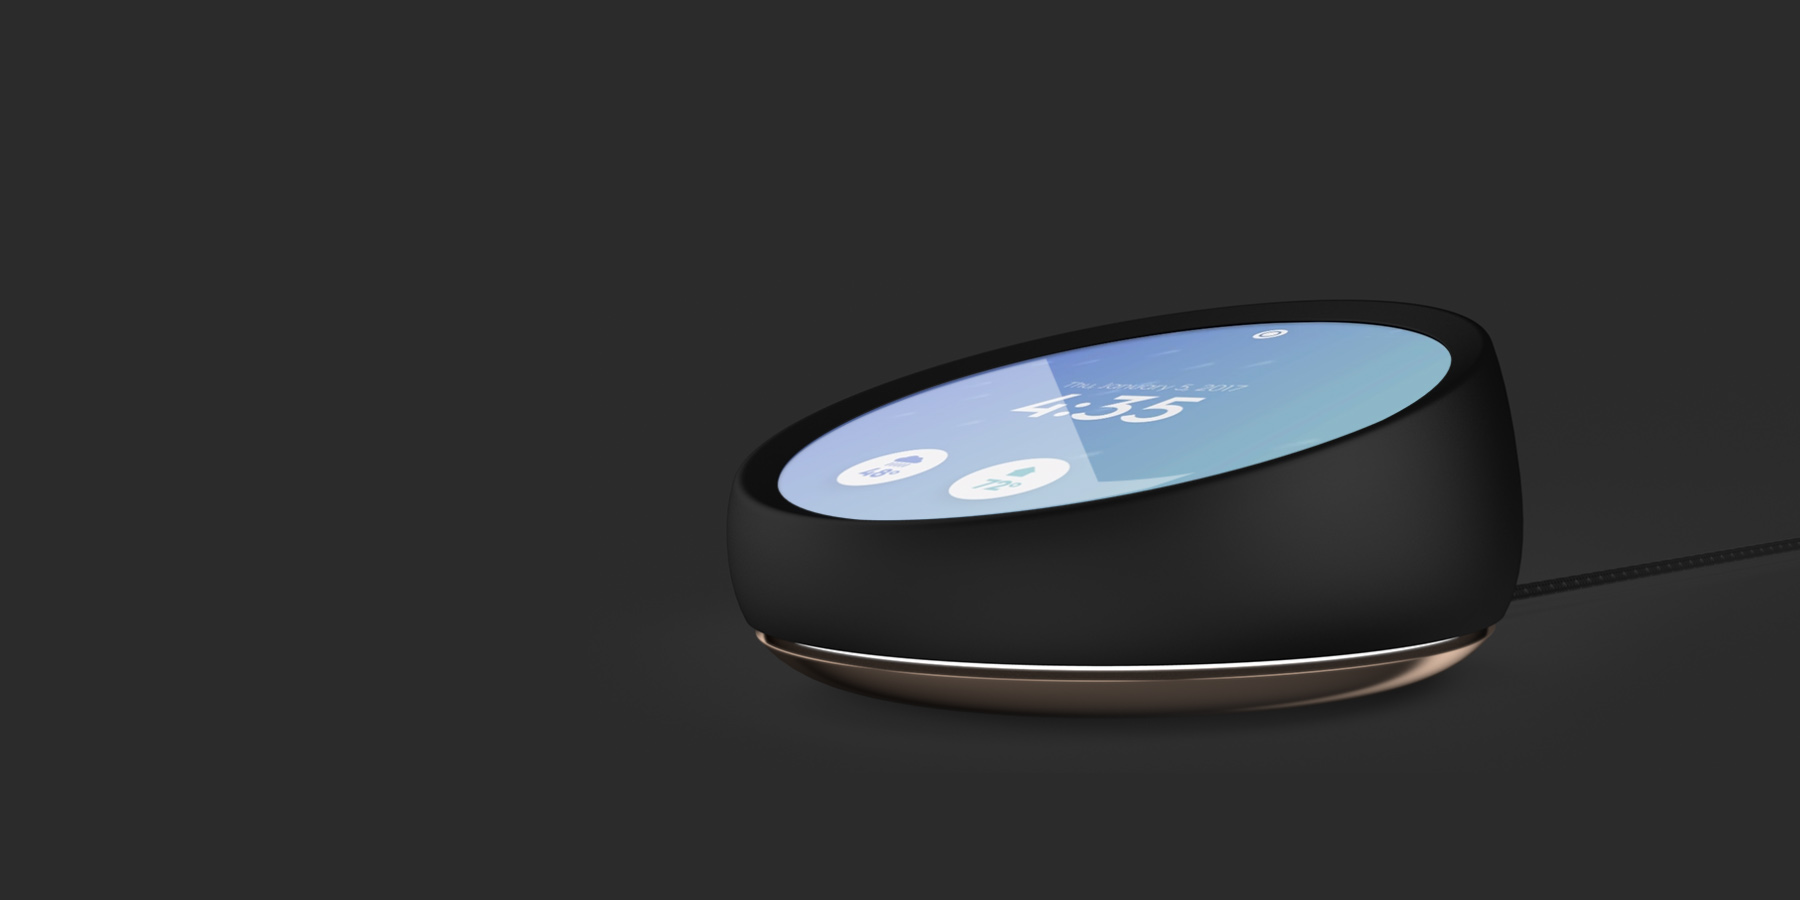 Essential Home is a Siri Speaker competitor that integrates with